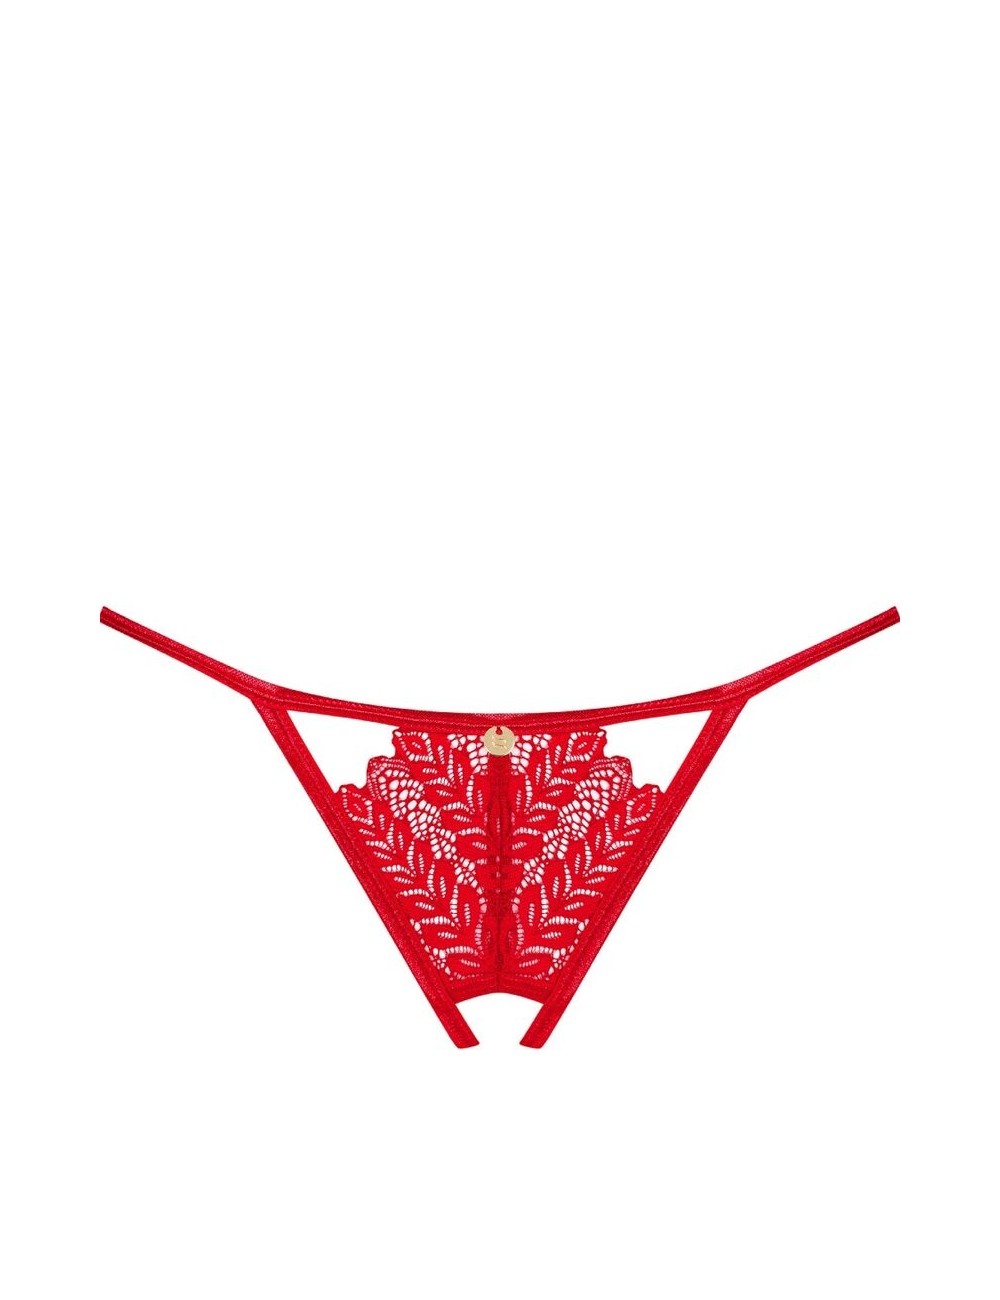 OBSESSIVE - INGRIDIA THONG CROTCHLESS RED XS/S